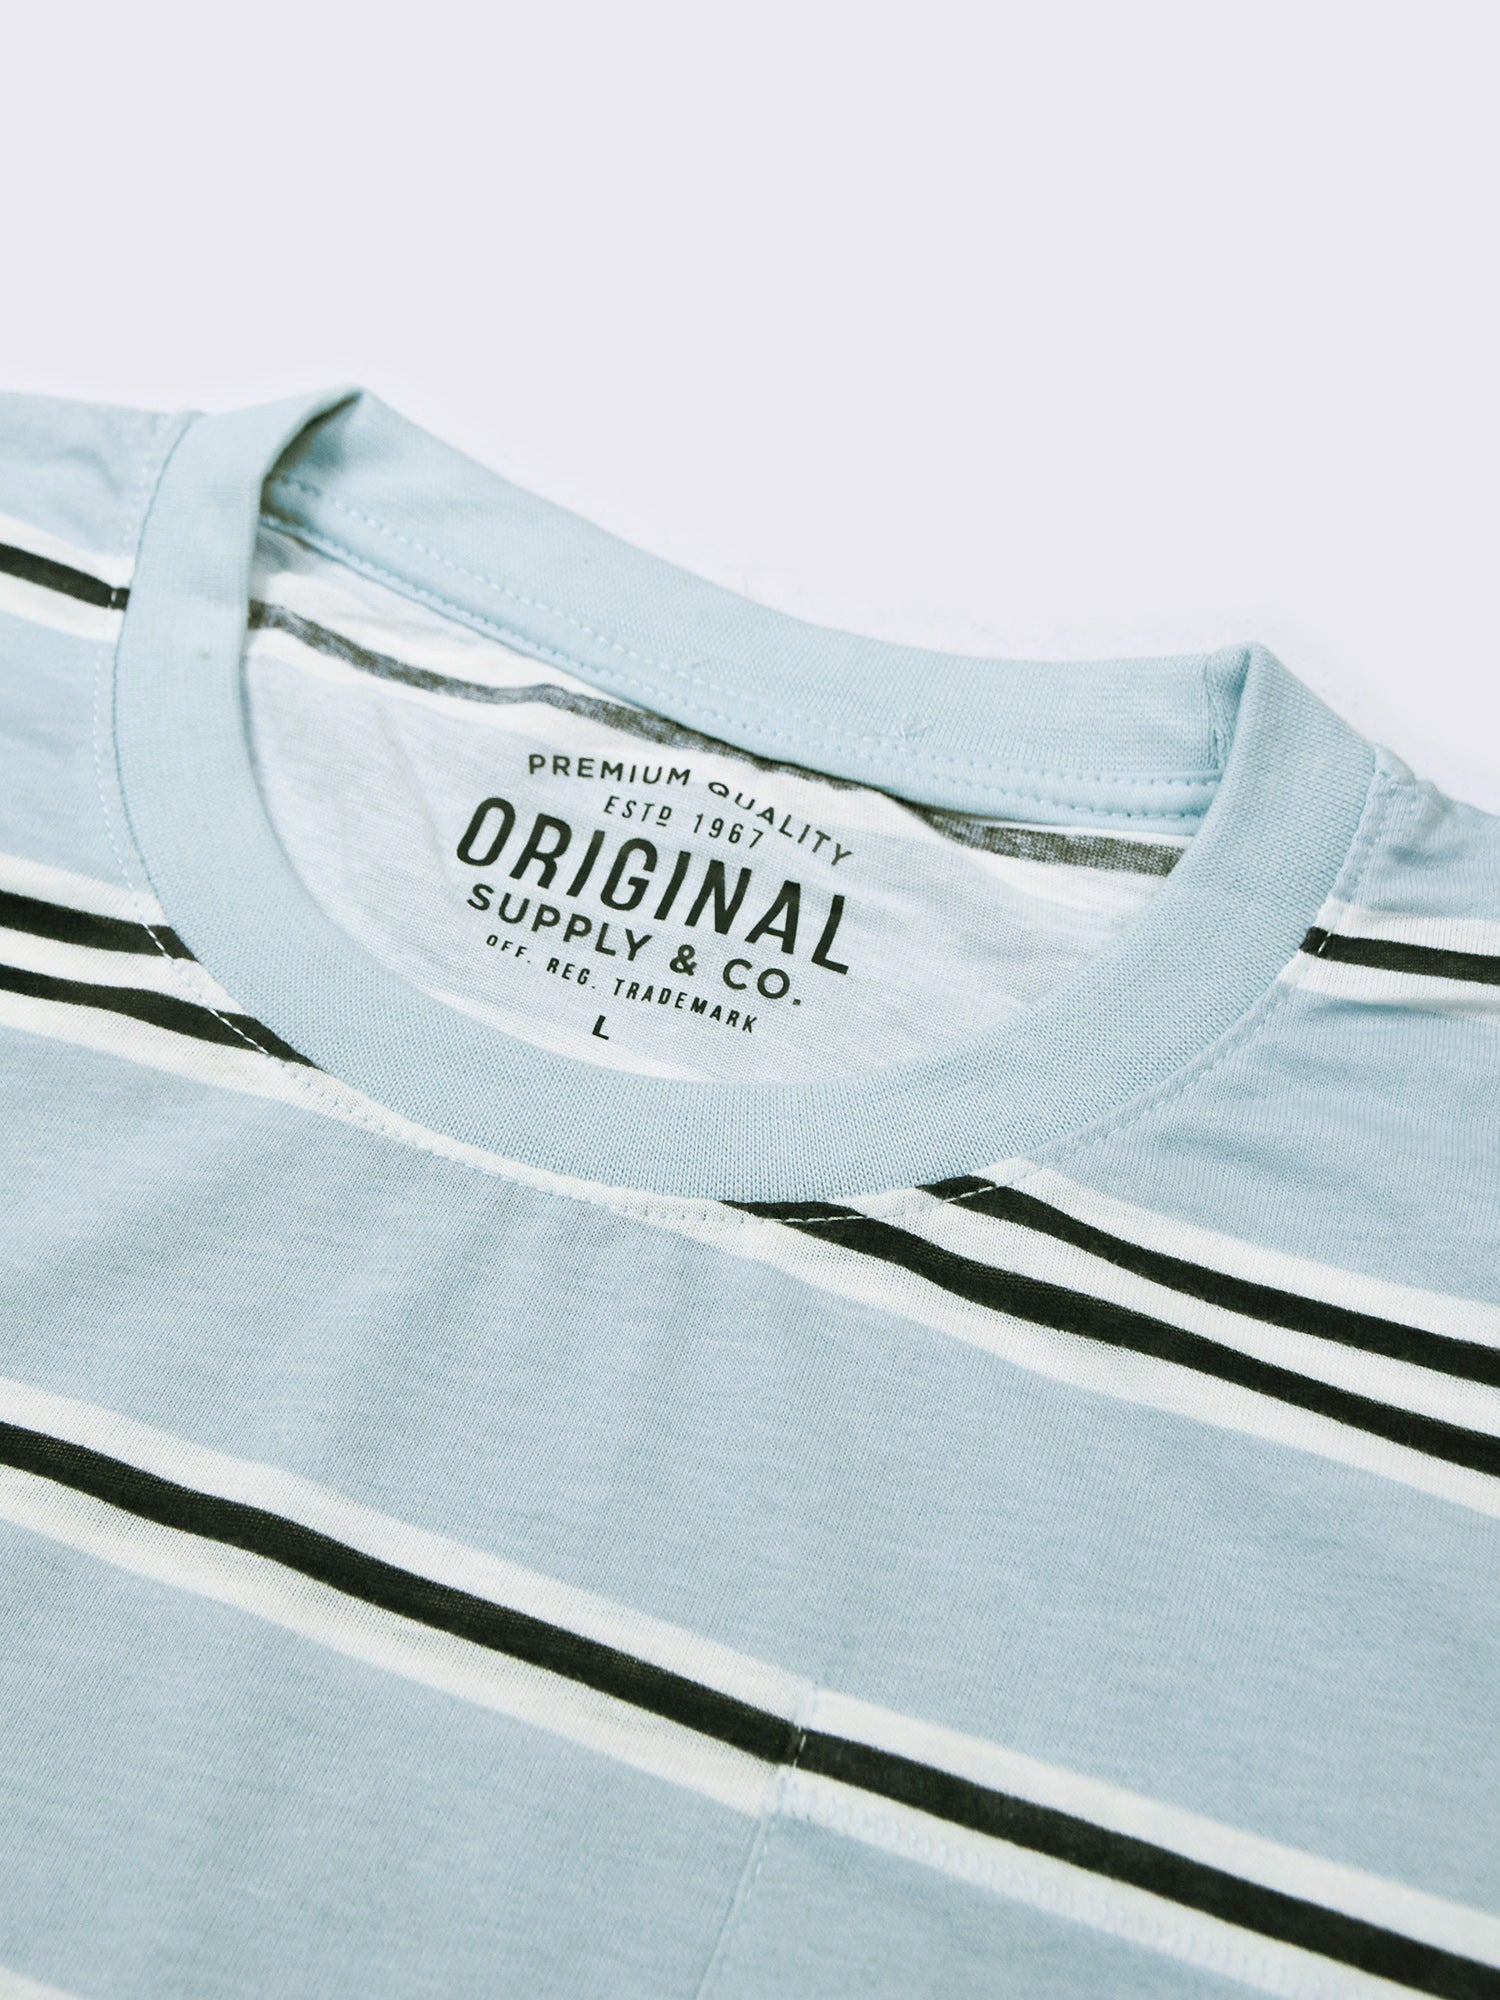 Orignal Single Jersey Crew Neck Tee Shirt For Men-Blue With Stripes-SP1736/RT2425